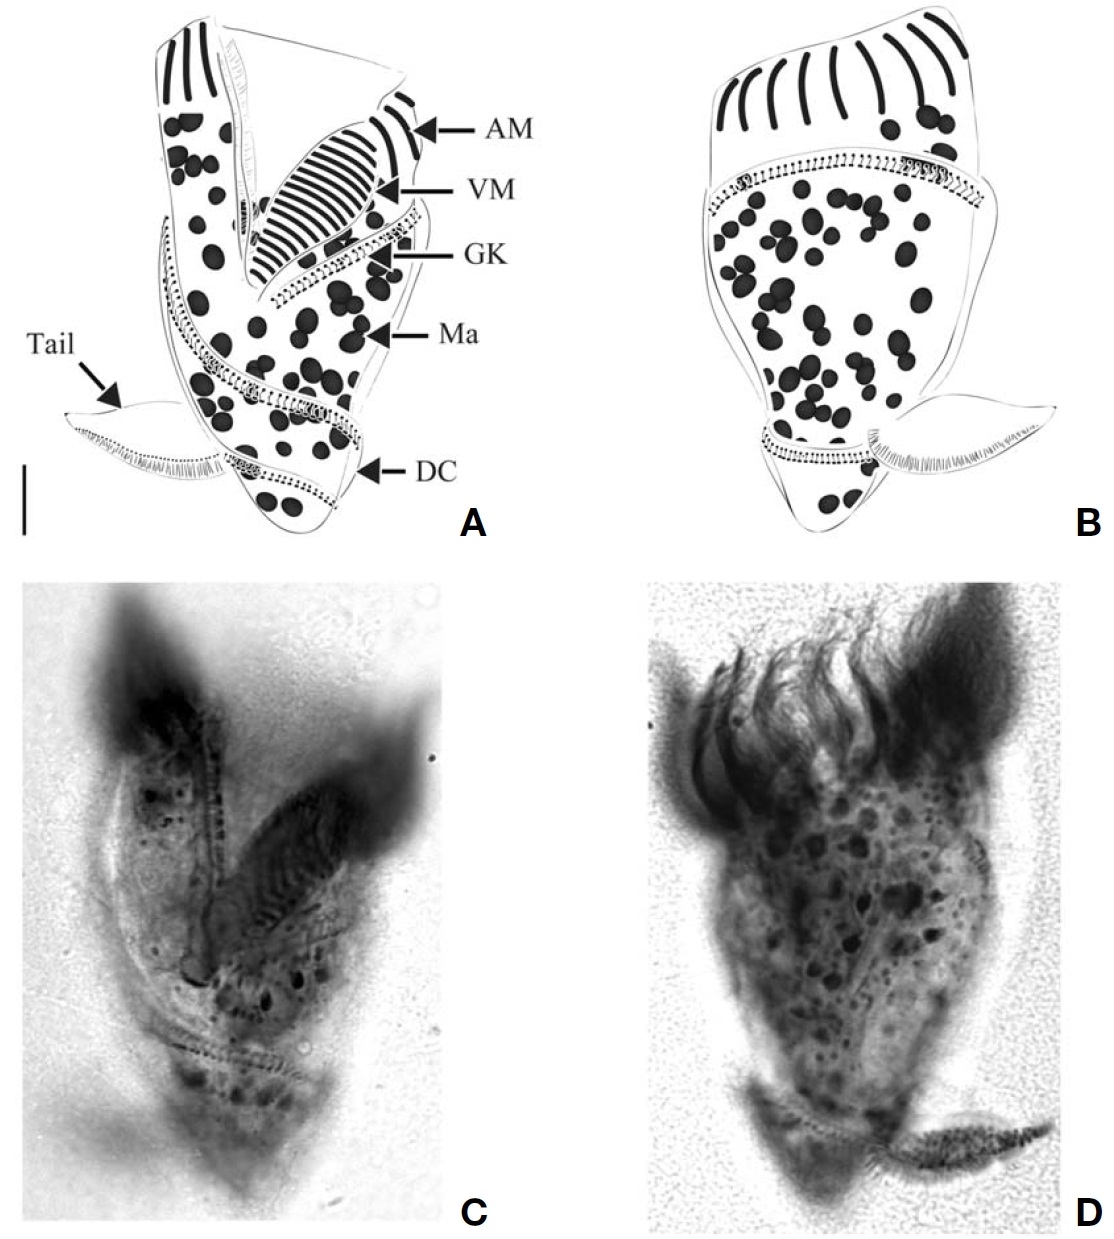 Spirotontonia turbinata after protargol impregnation. A C Ventral view; B D Dorsal view. DC distended cell surface. Scalebar: 10 μm.